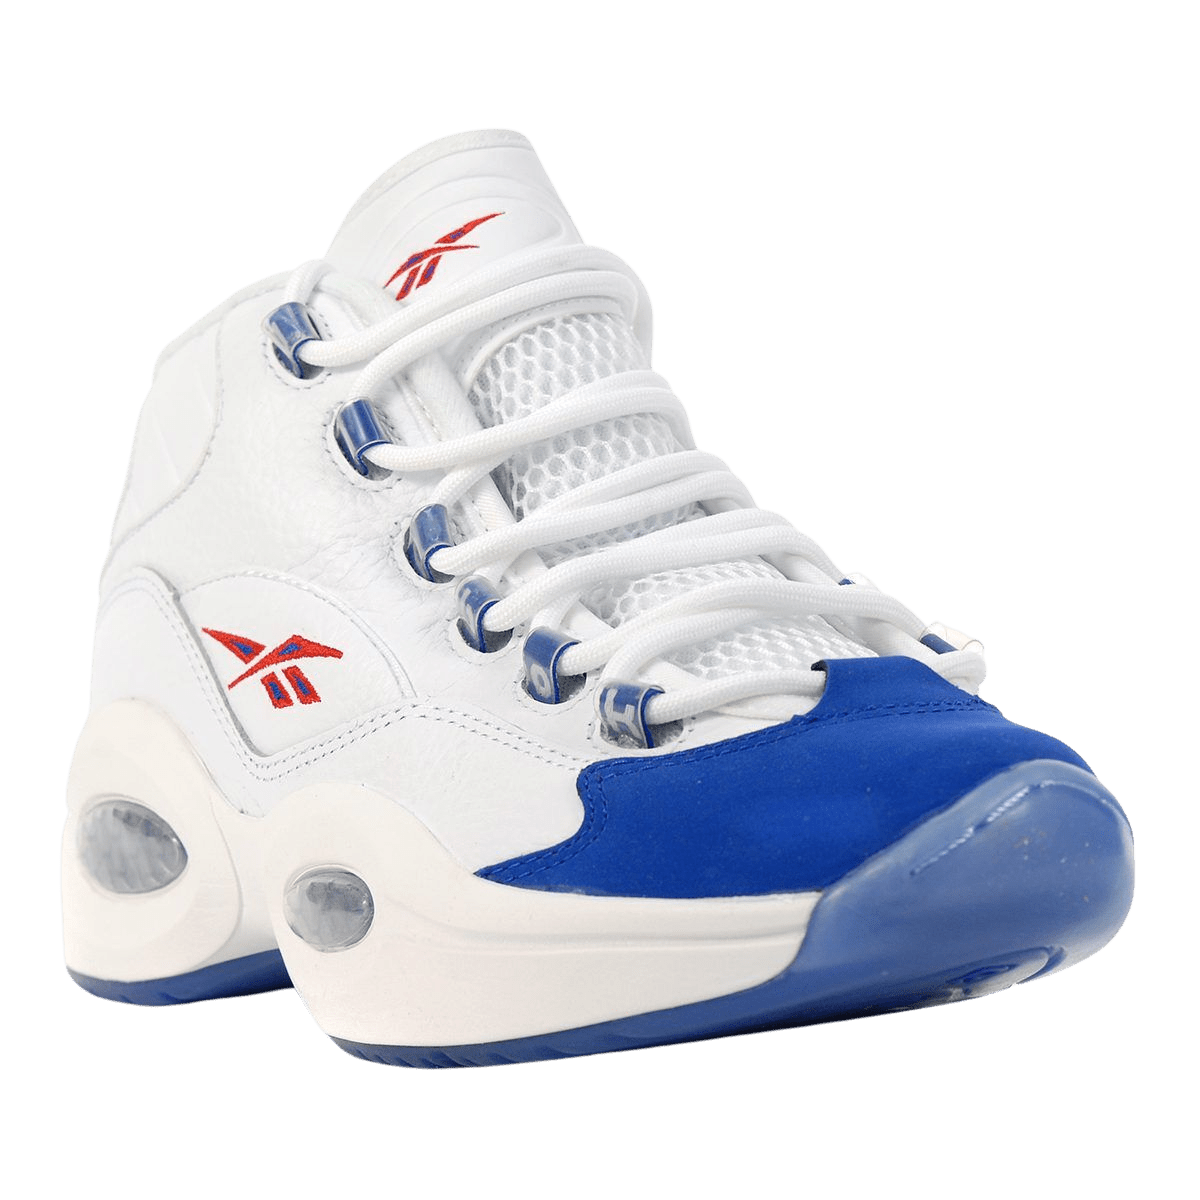 Reebok Question Performance Review - WearTesters